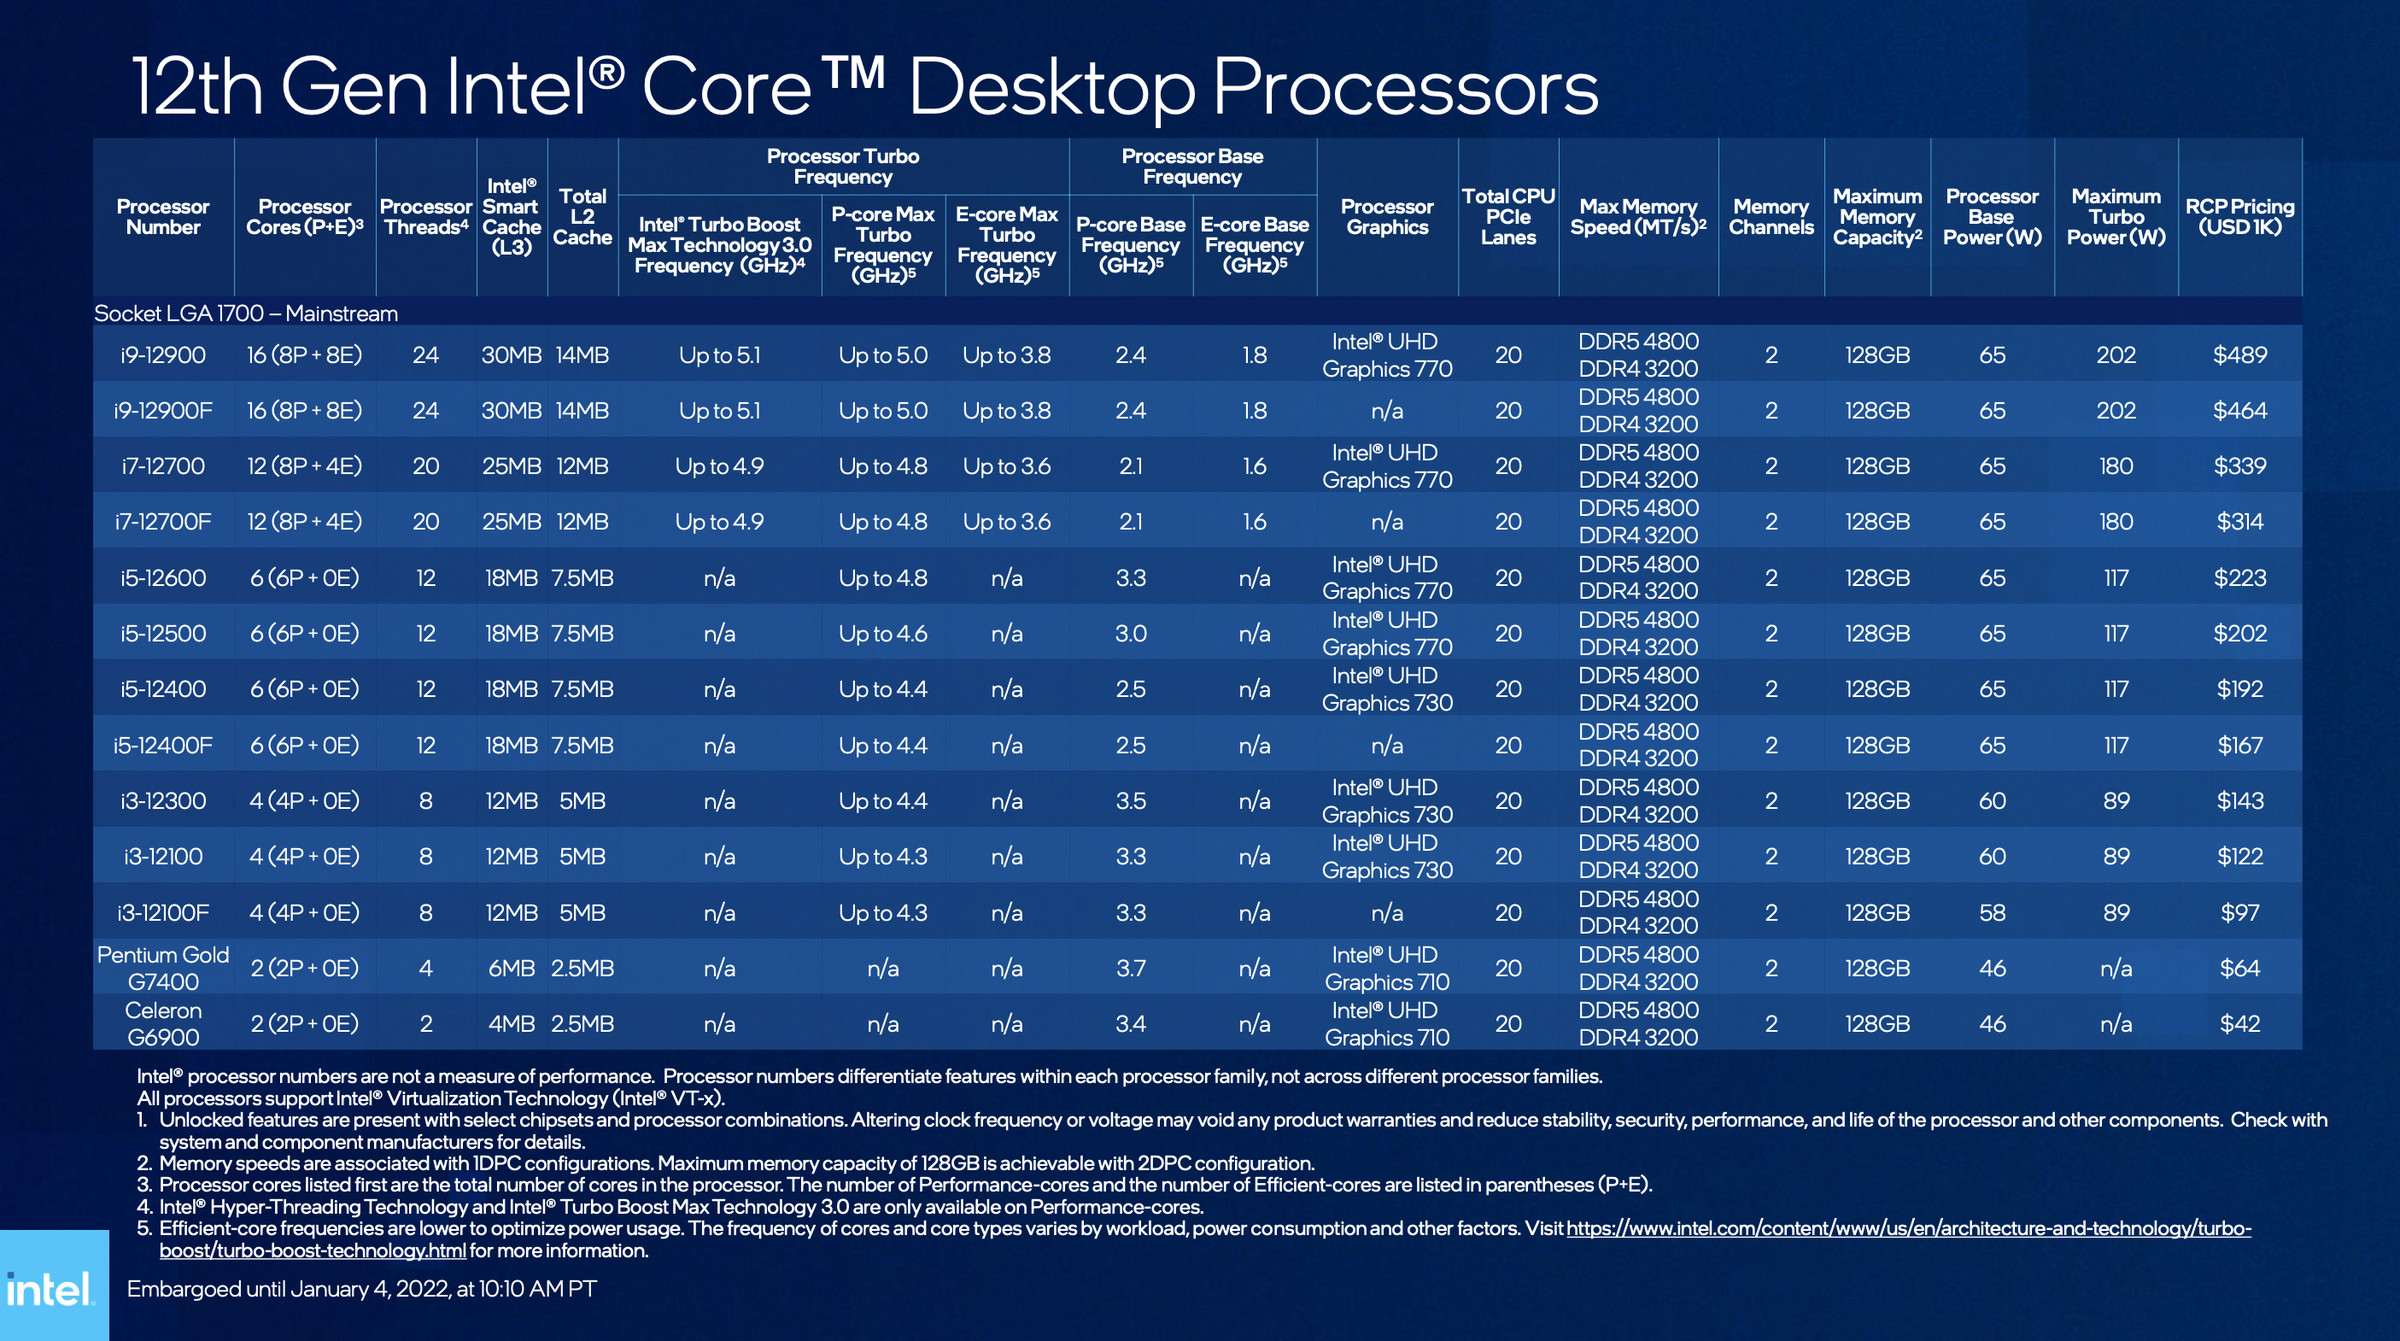 The main lineup of Intel’s newest 12th Gen Alder Lake chips.